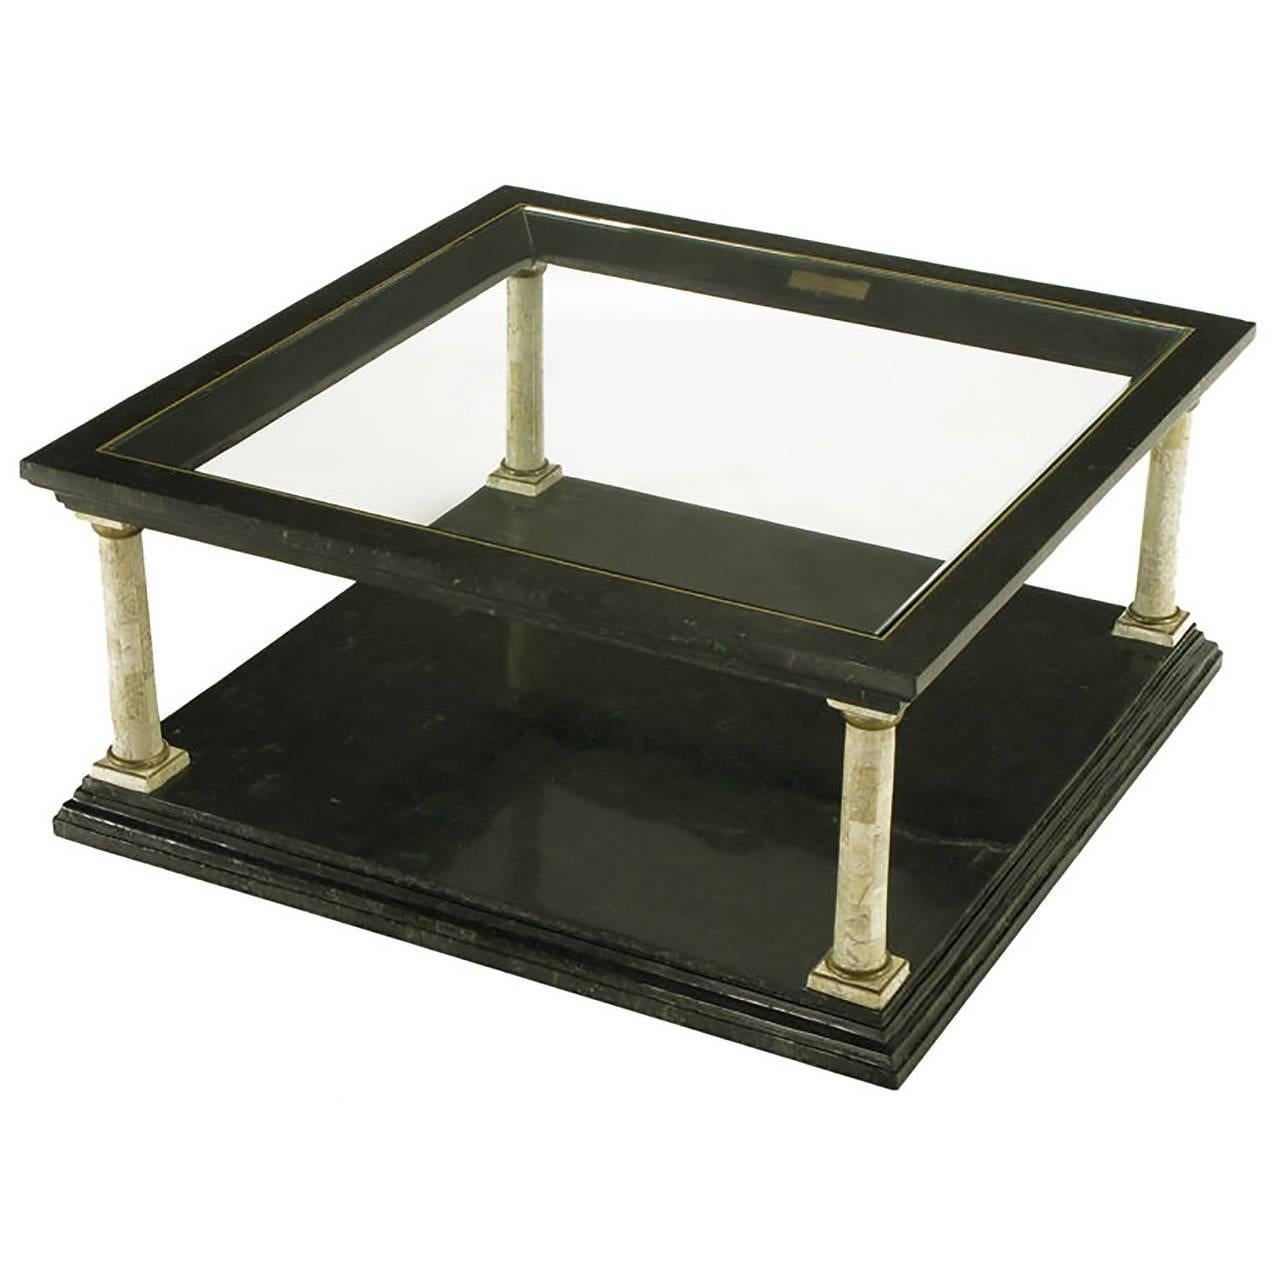 Features four Doric columns, with shafts of creamy tessellated fossil stone, atop a black tessellated marble base. The columns, with brass capitals and base rings, support the upper part of the table, which is also black stone. It has brass trim